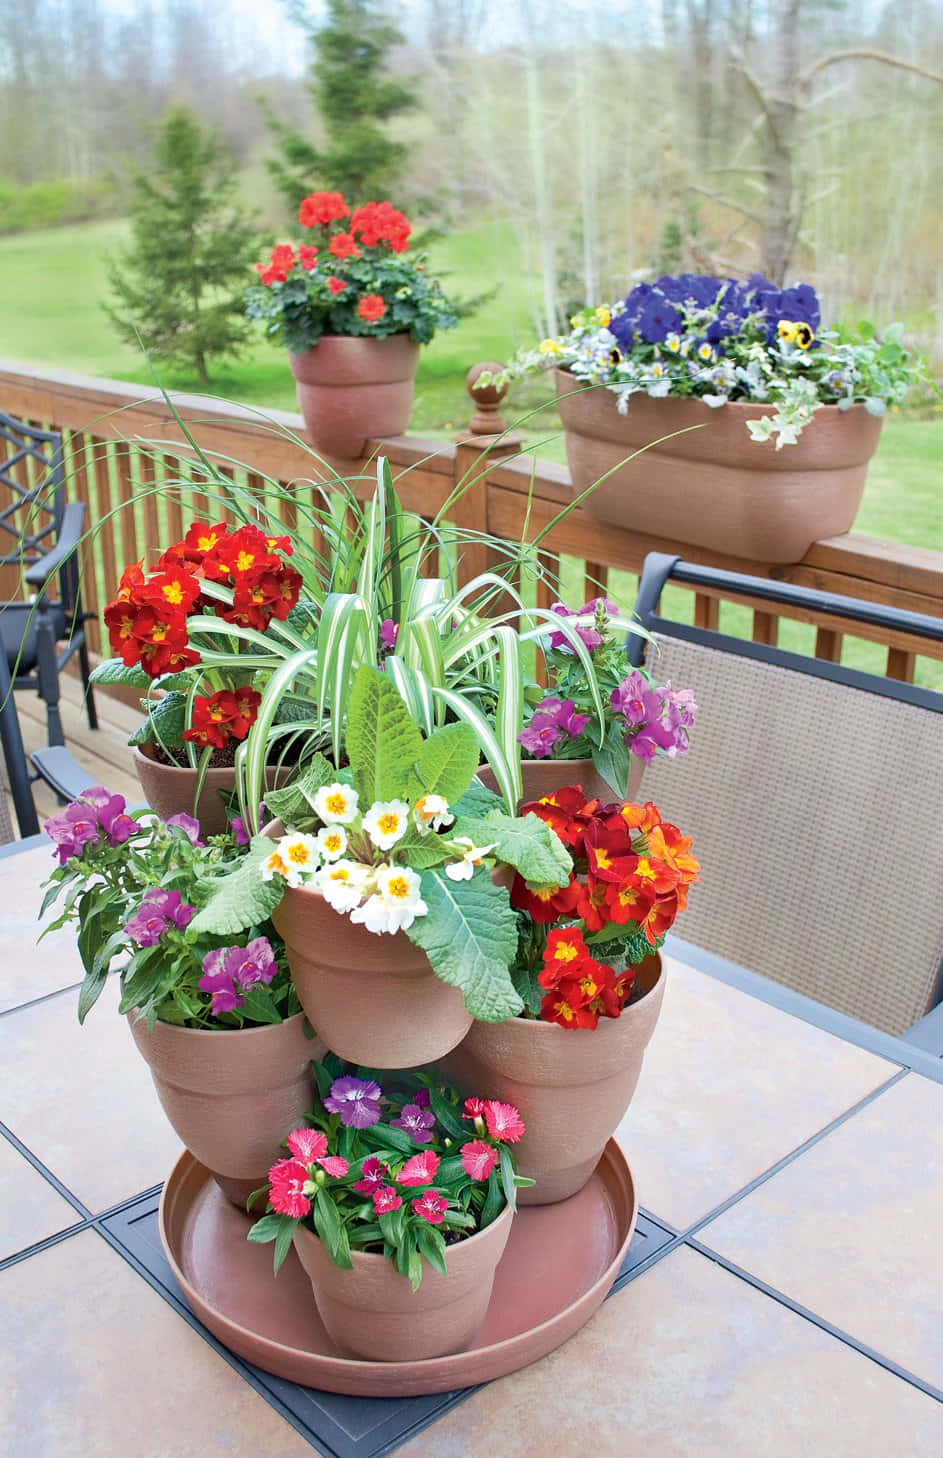 Find Peace in Your Home with a Flower Pot